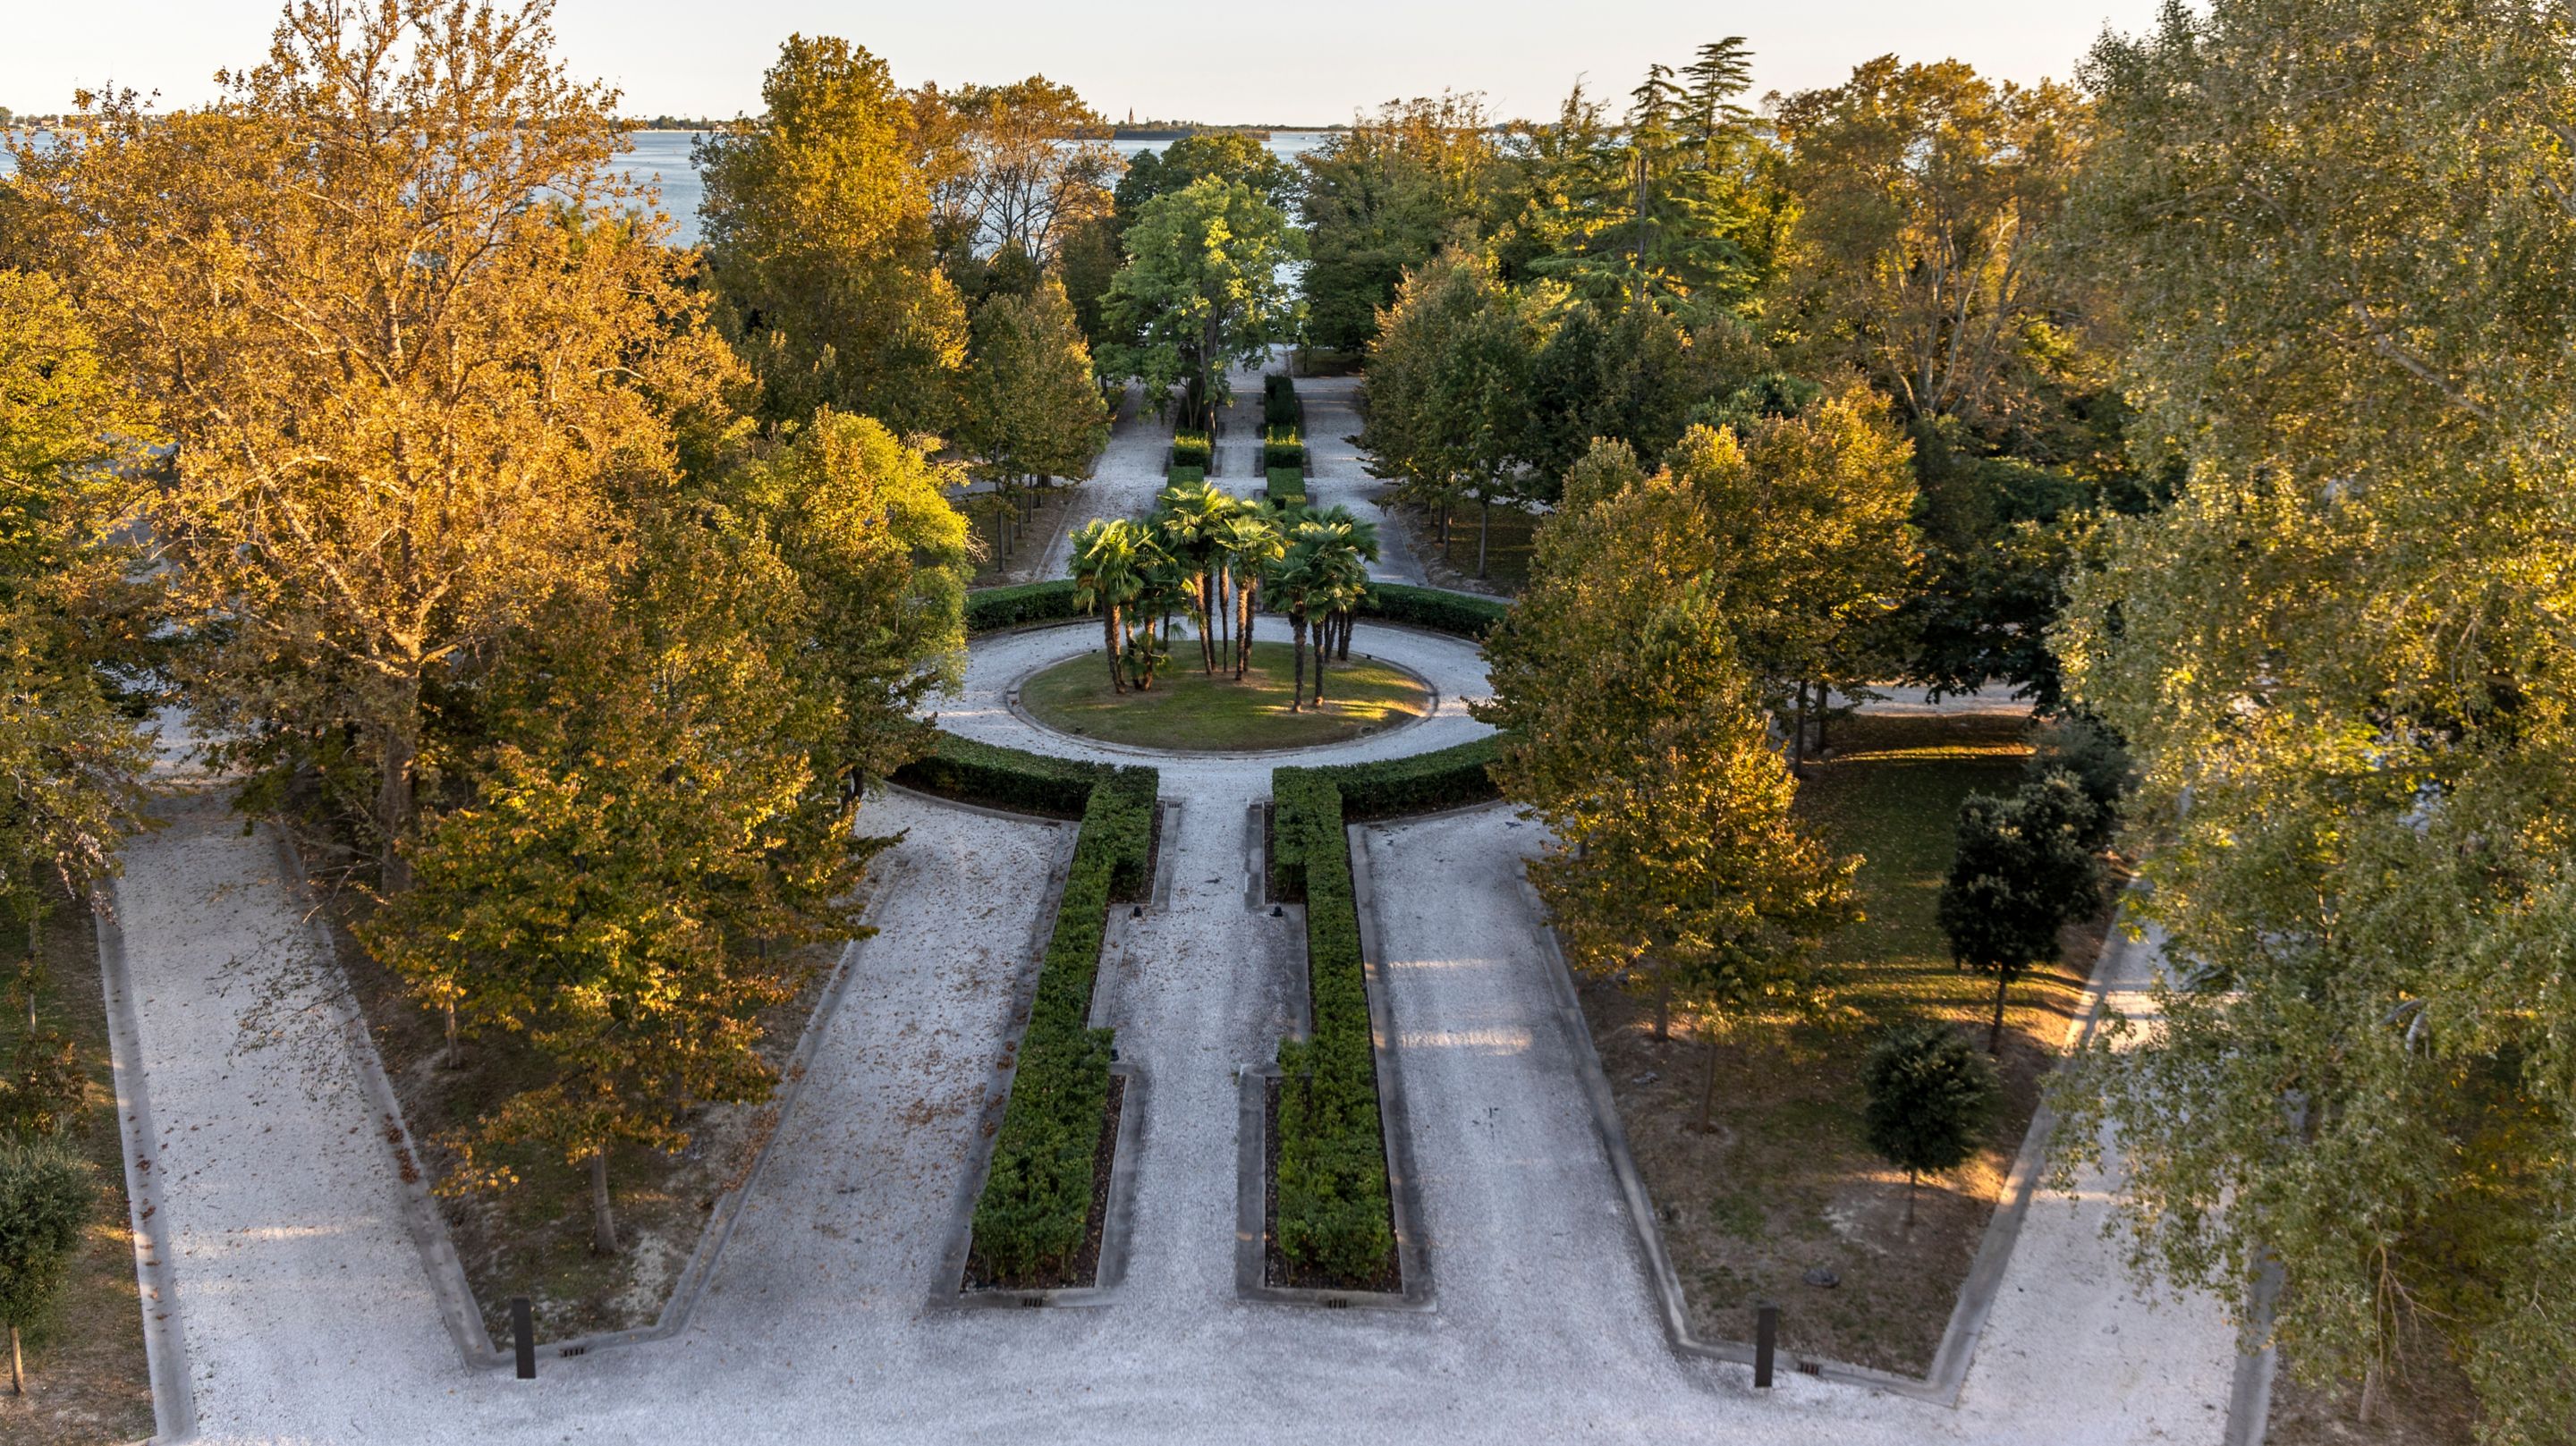 Birds eye view of garden with paths lined with trees.